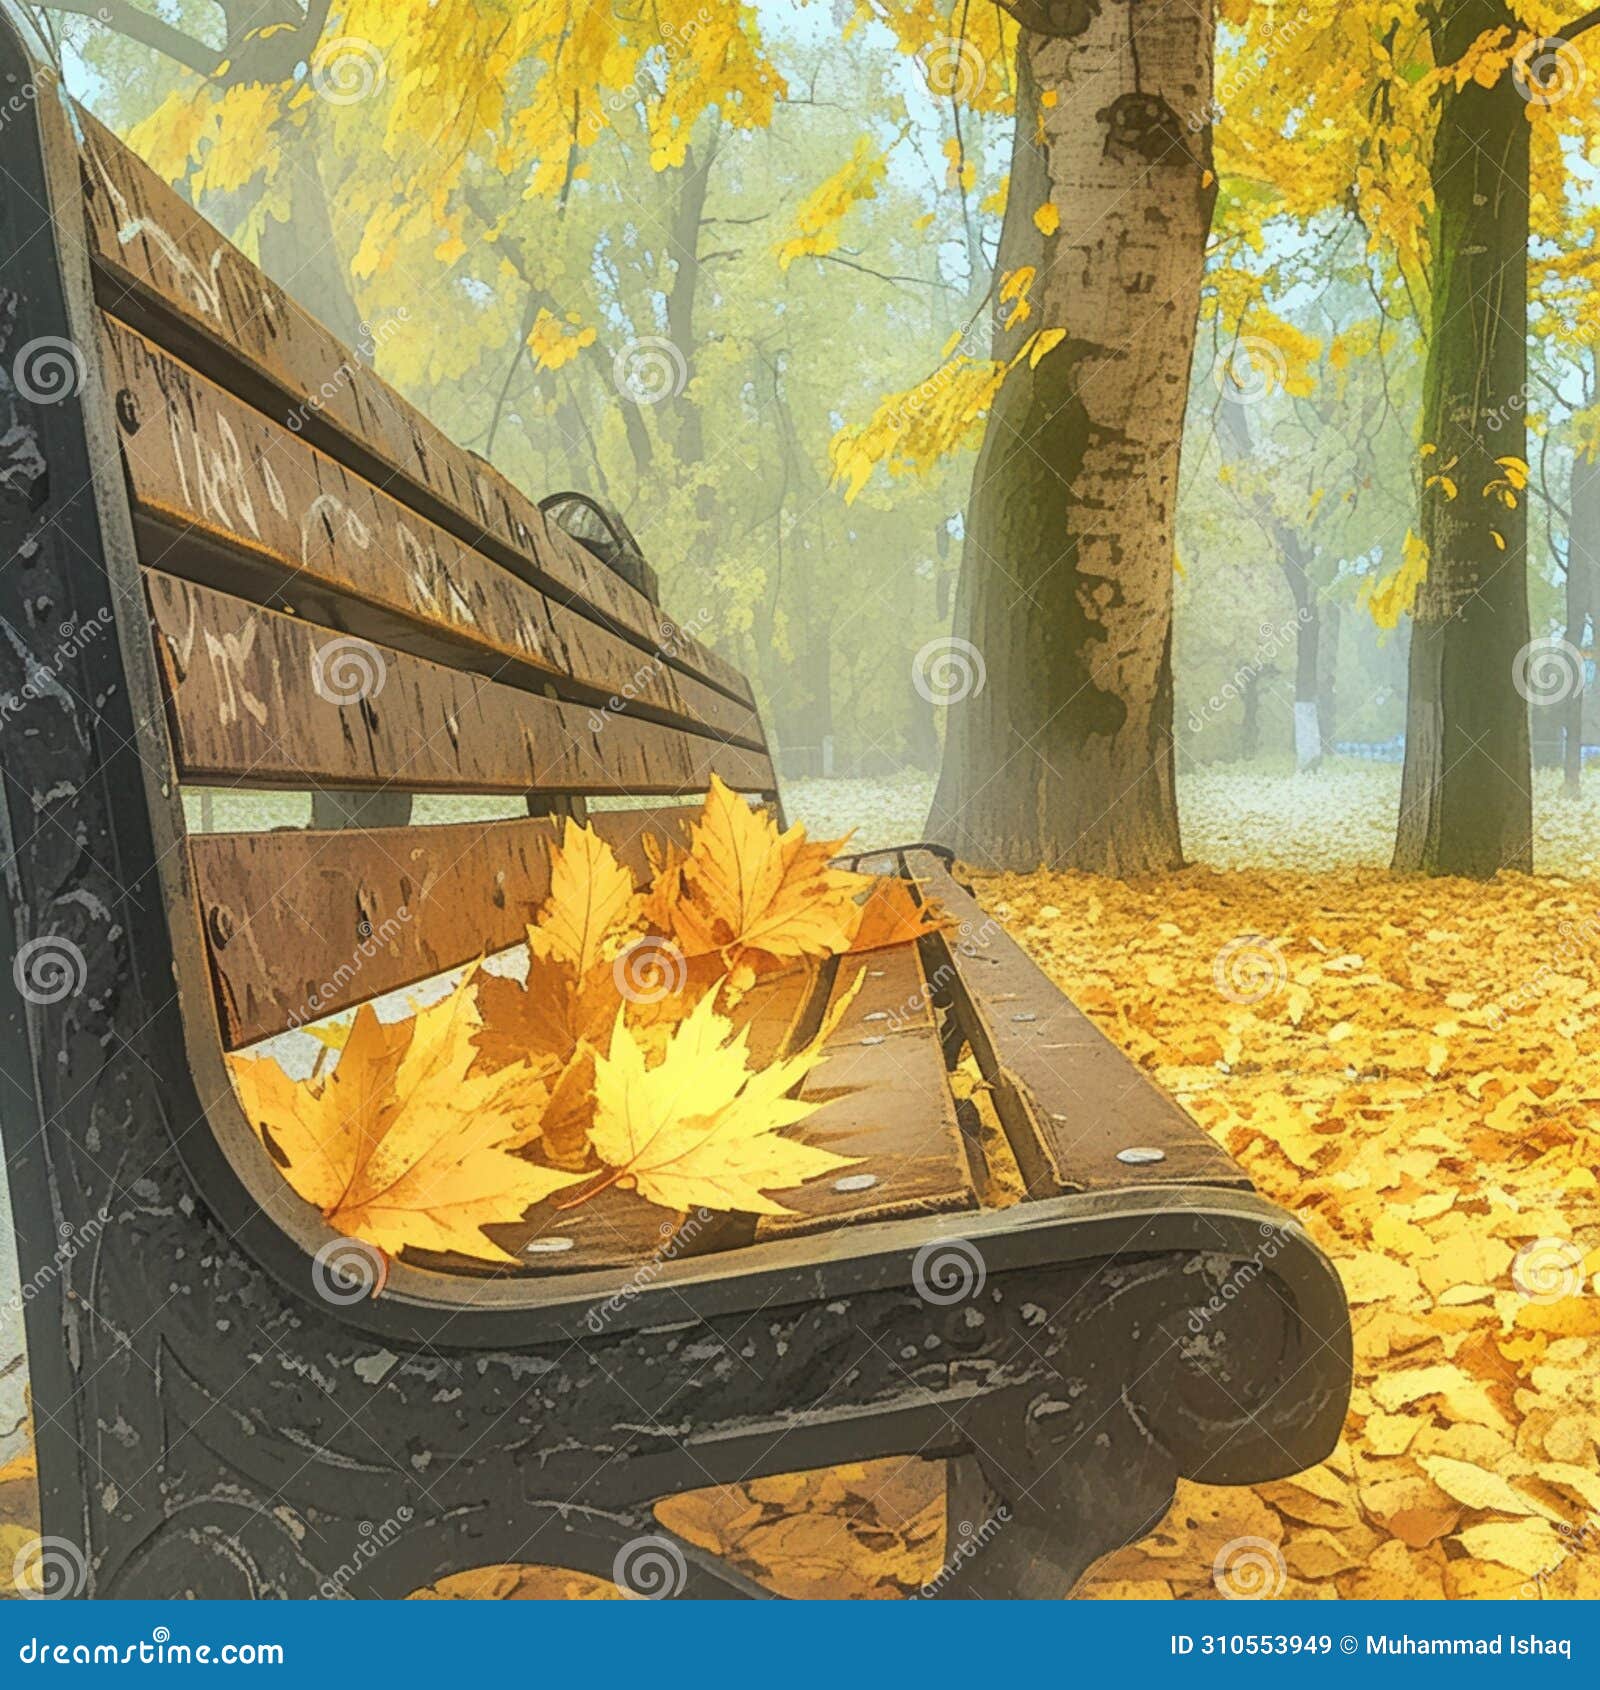 park bench with metal sidewall, adorned with yellow autumn leaves